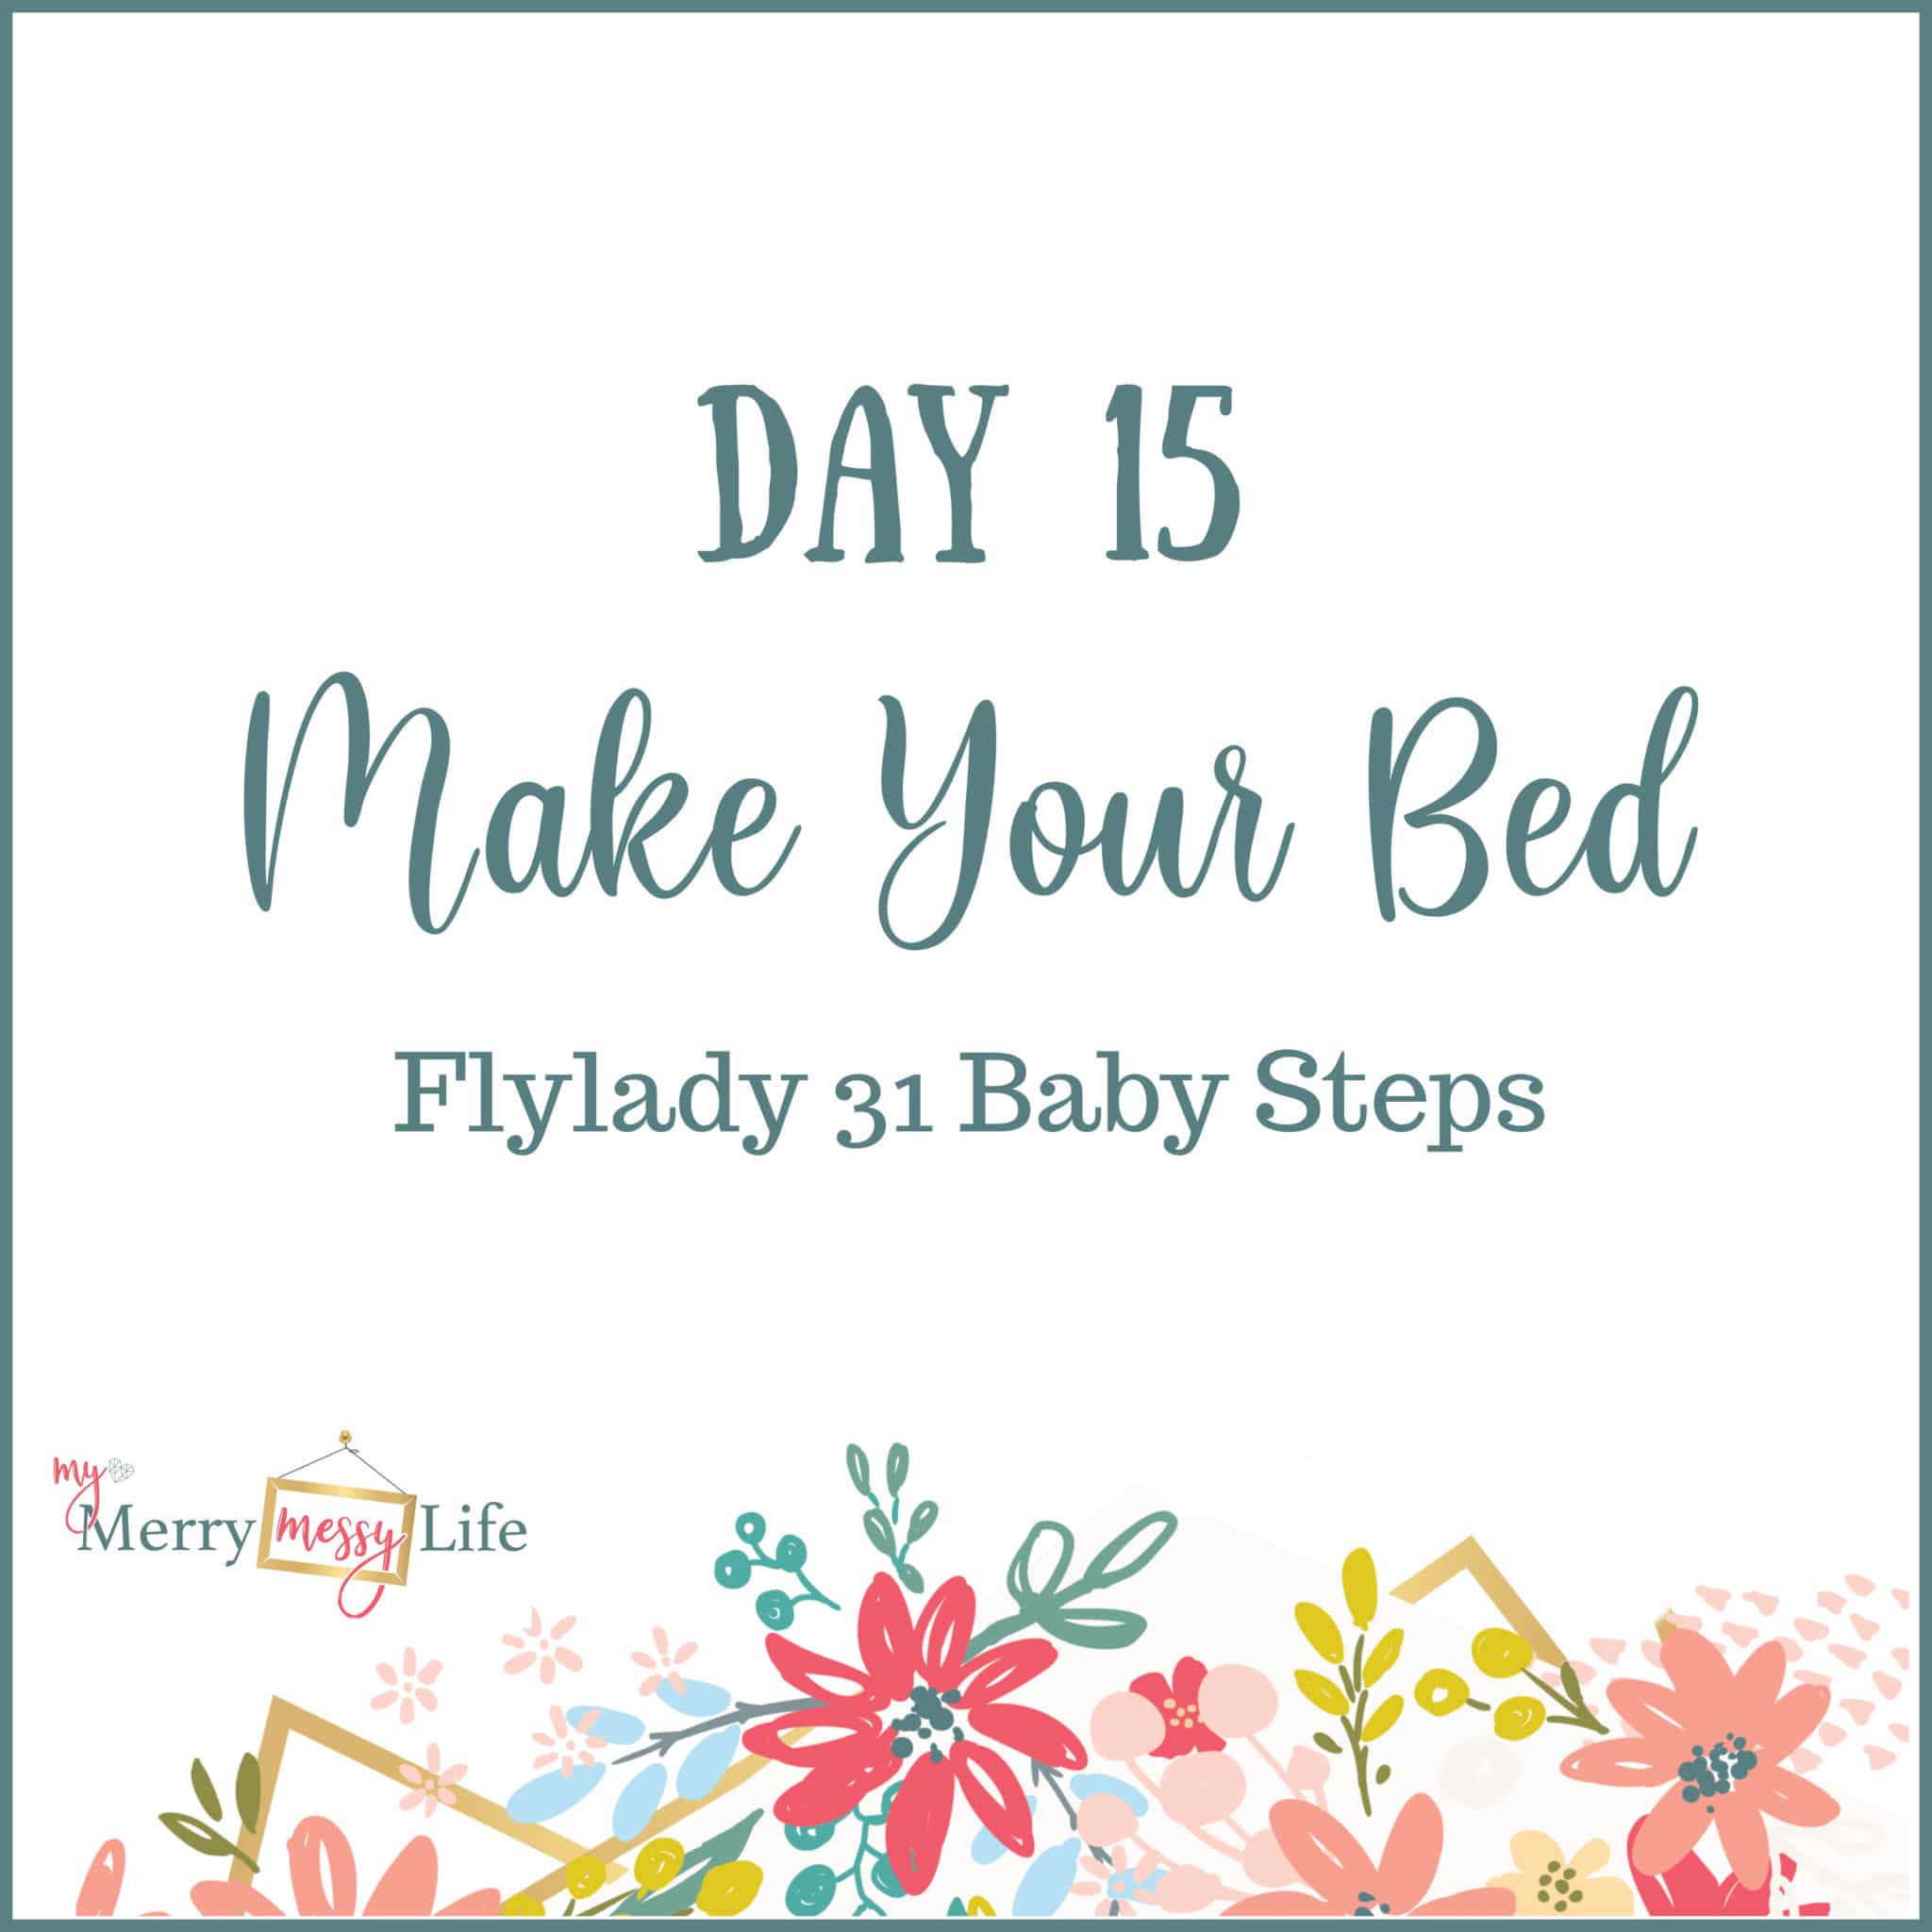 Day 15 - Make Your Bed